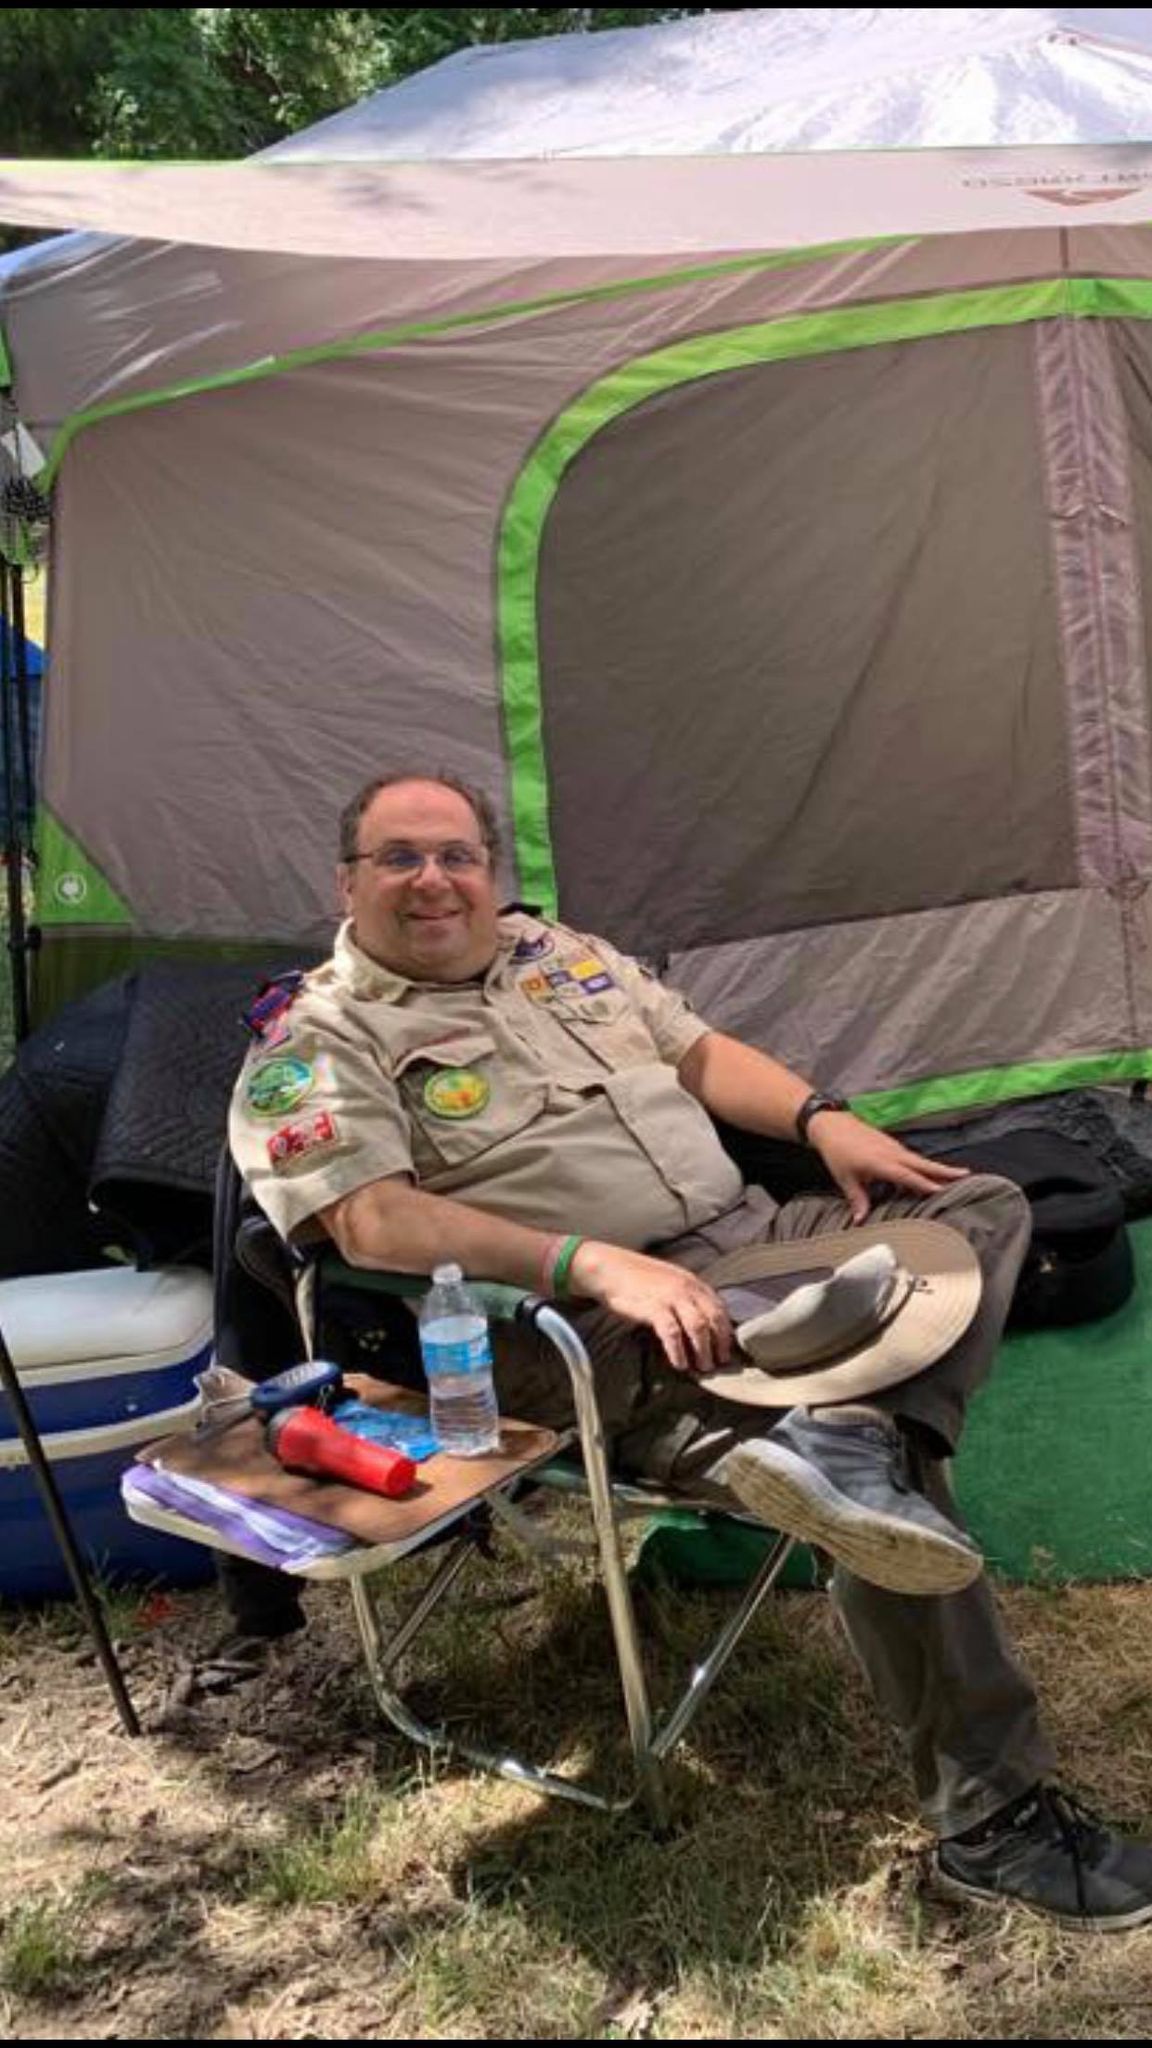 Would you trust your kid with this "scoutmaster?"